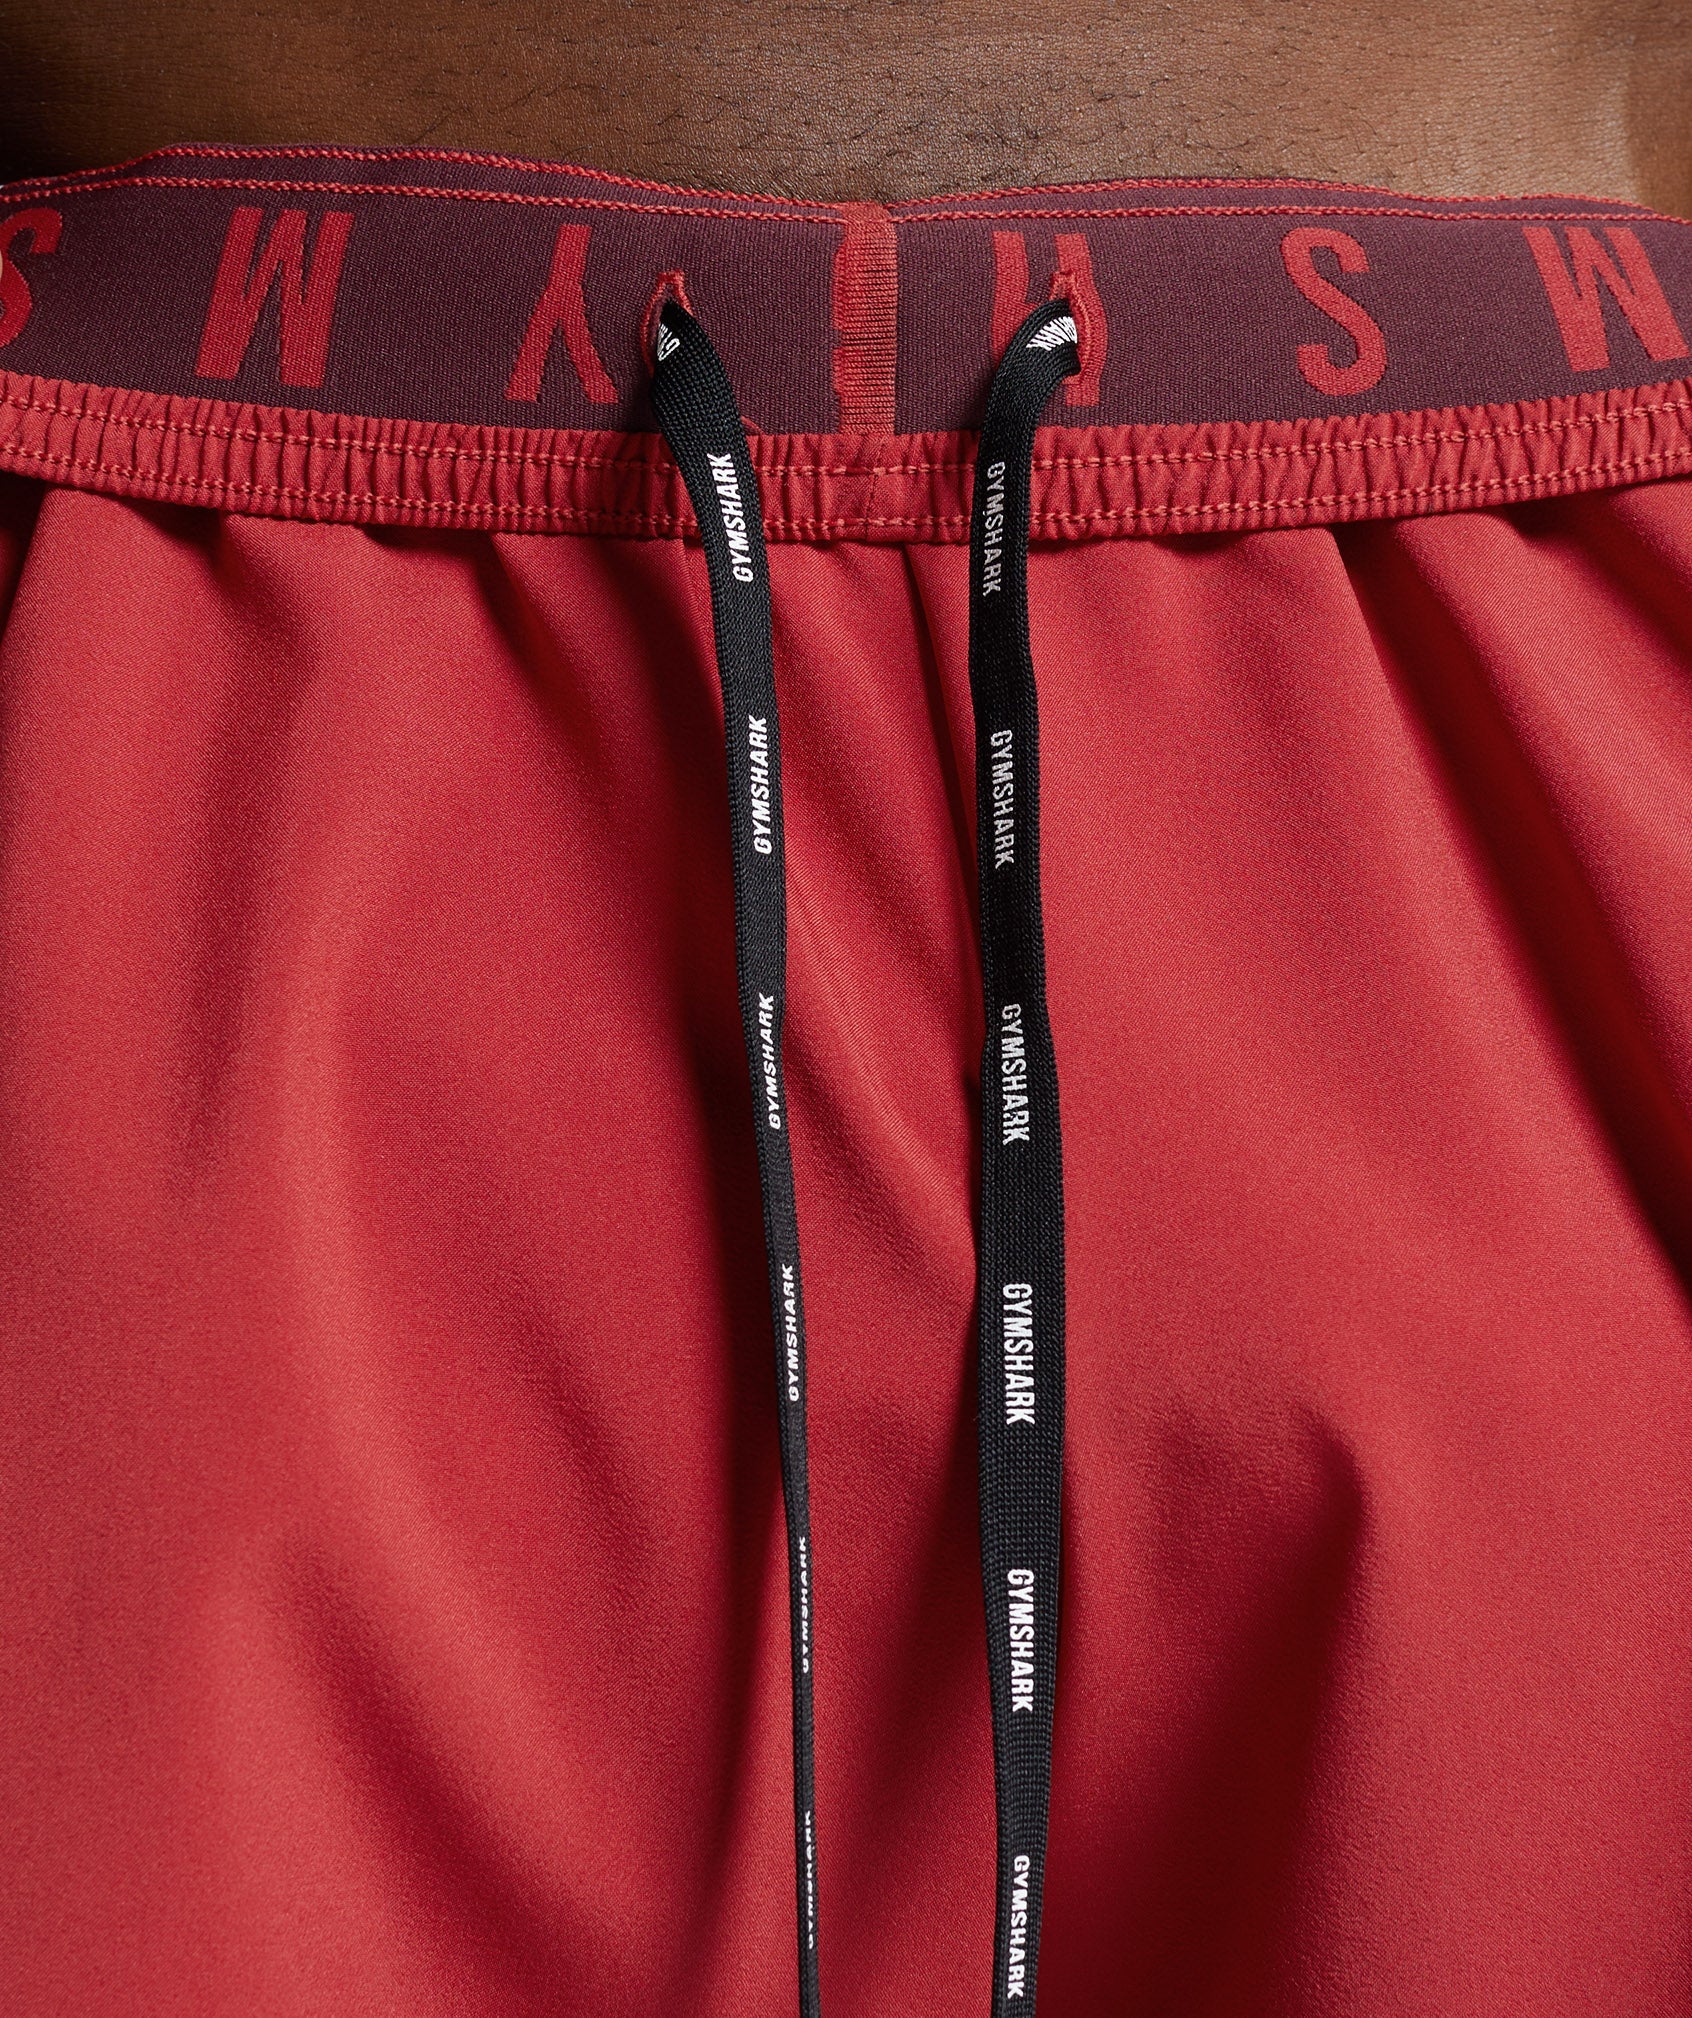 Sport 5" Shorts in Salsa Red/ Baked Maroon - view 6